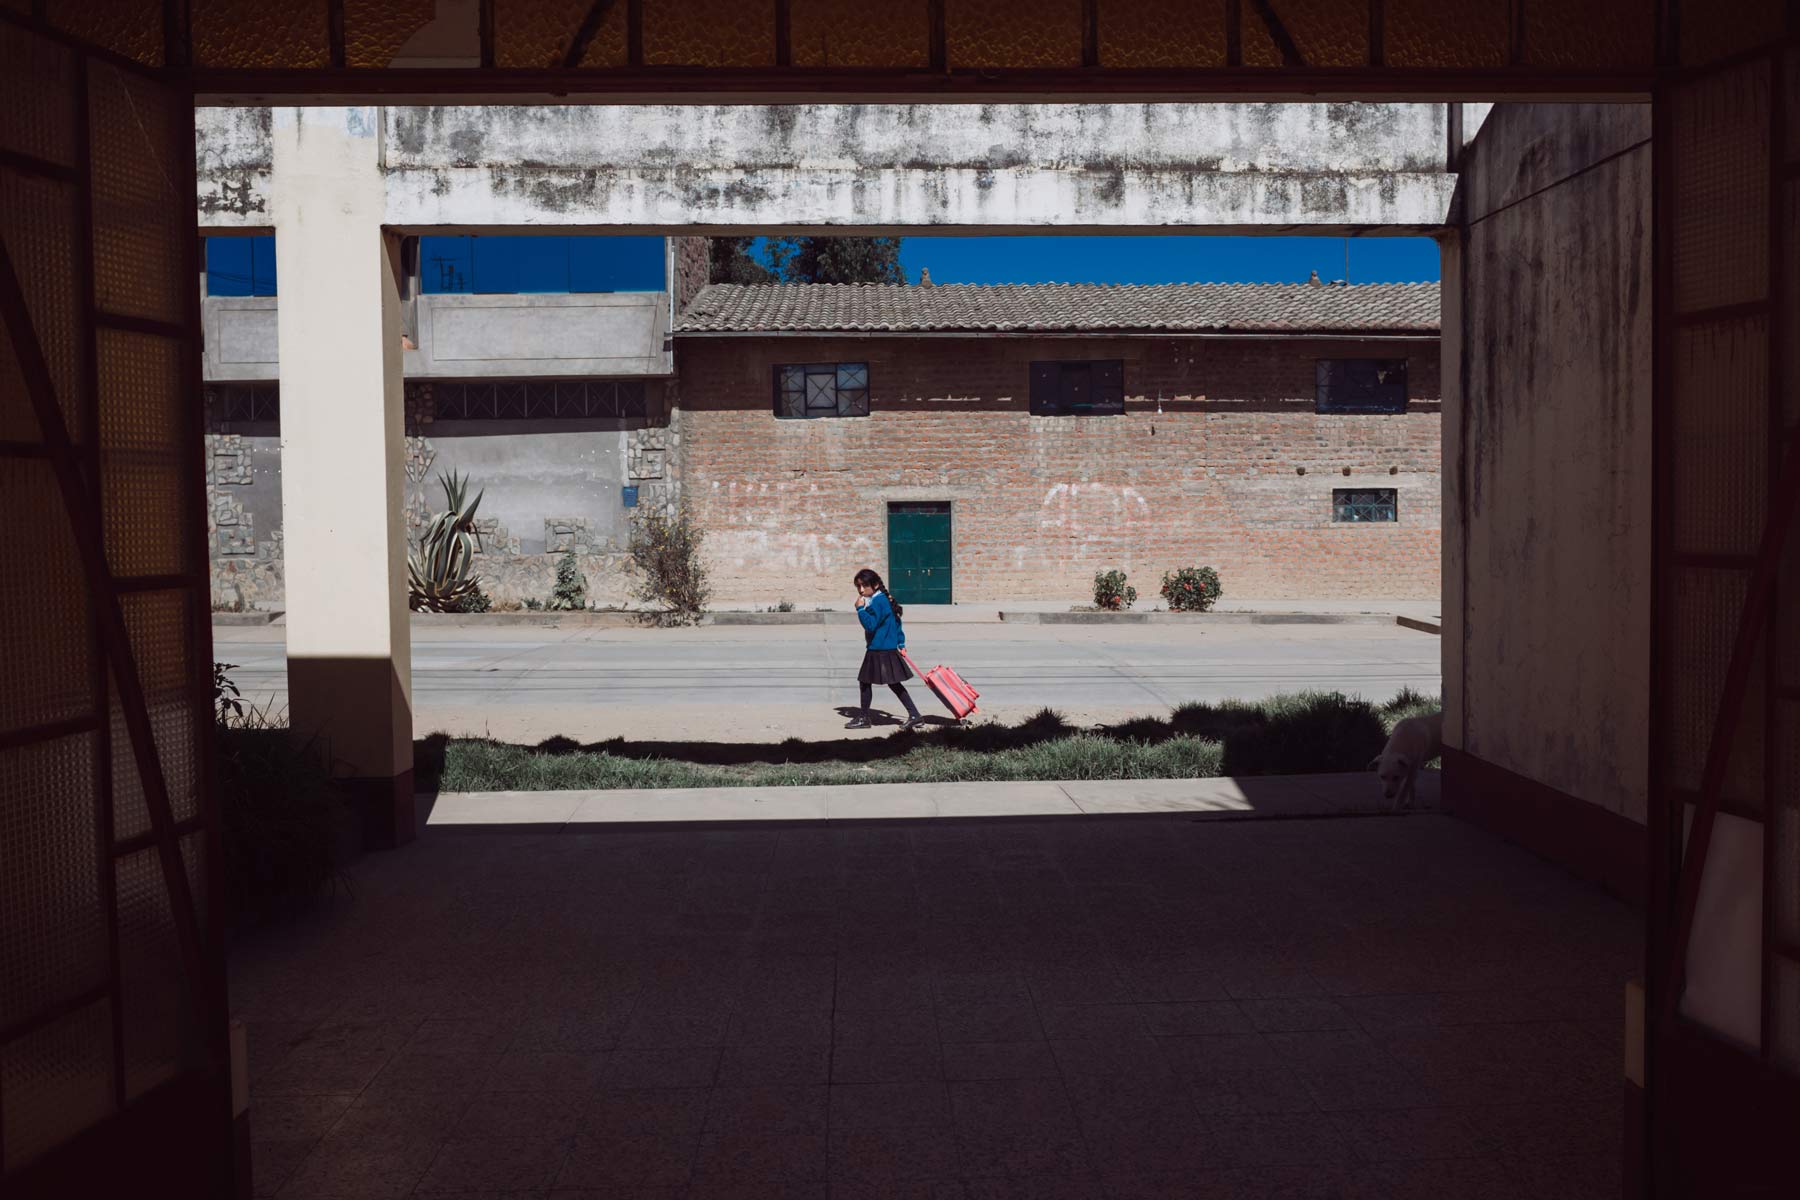 A school girl walking home crosses a large entryway in Hualhuas.